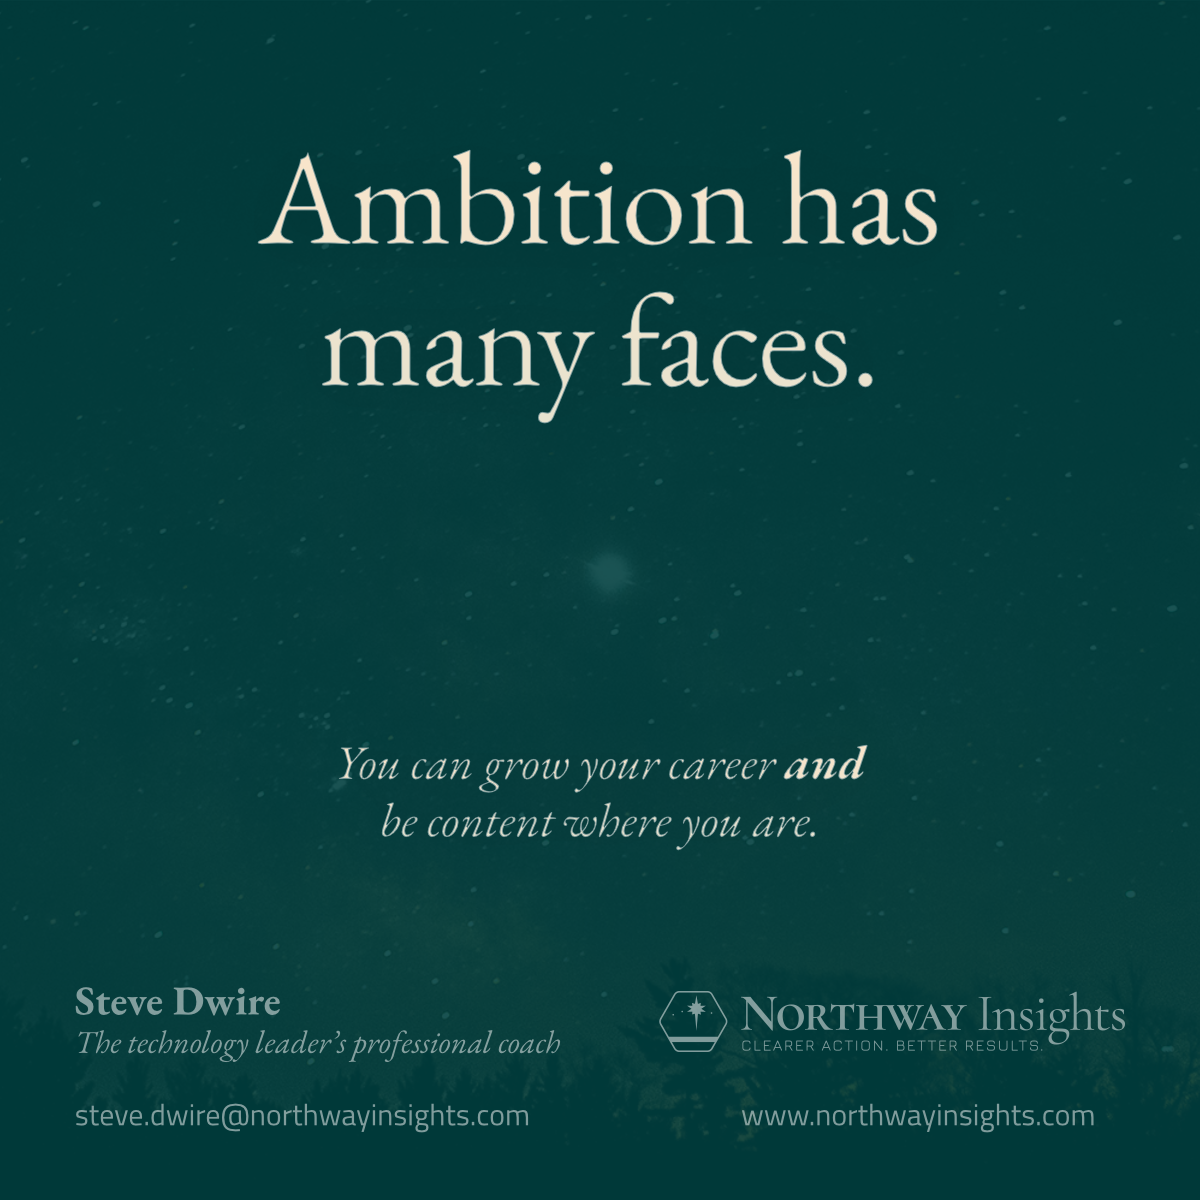 Ambition has many faces. (You can grow your career AND be content where you are.)